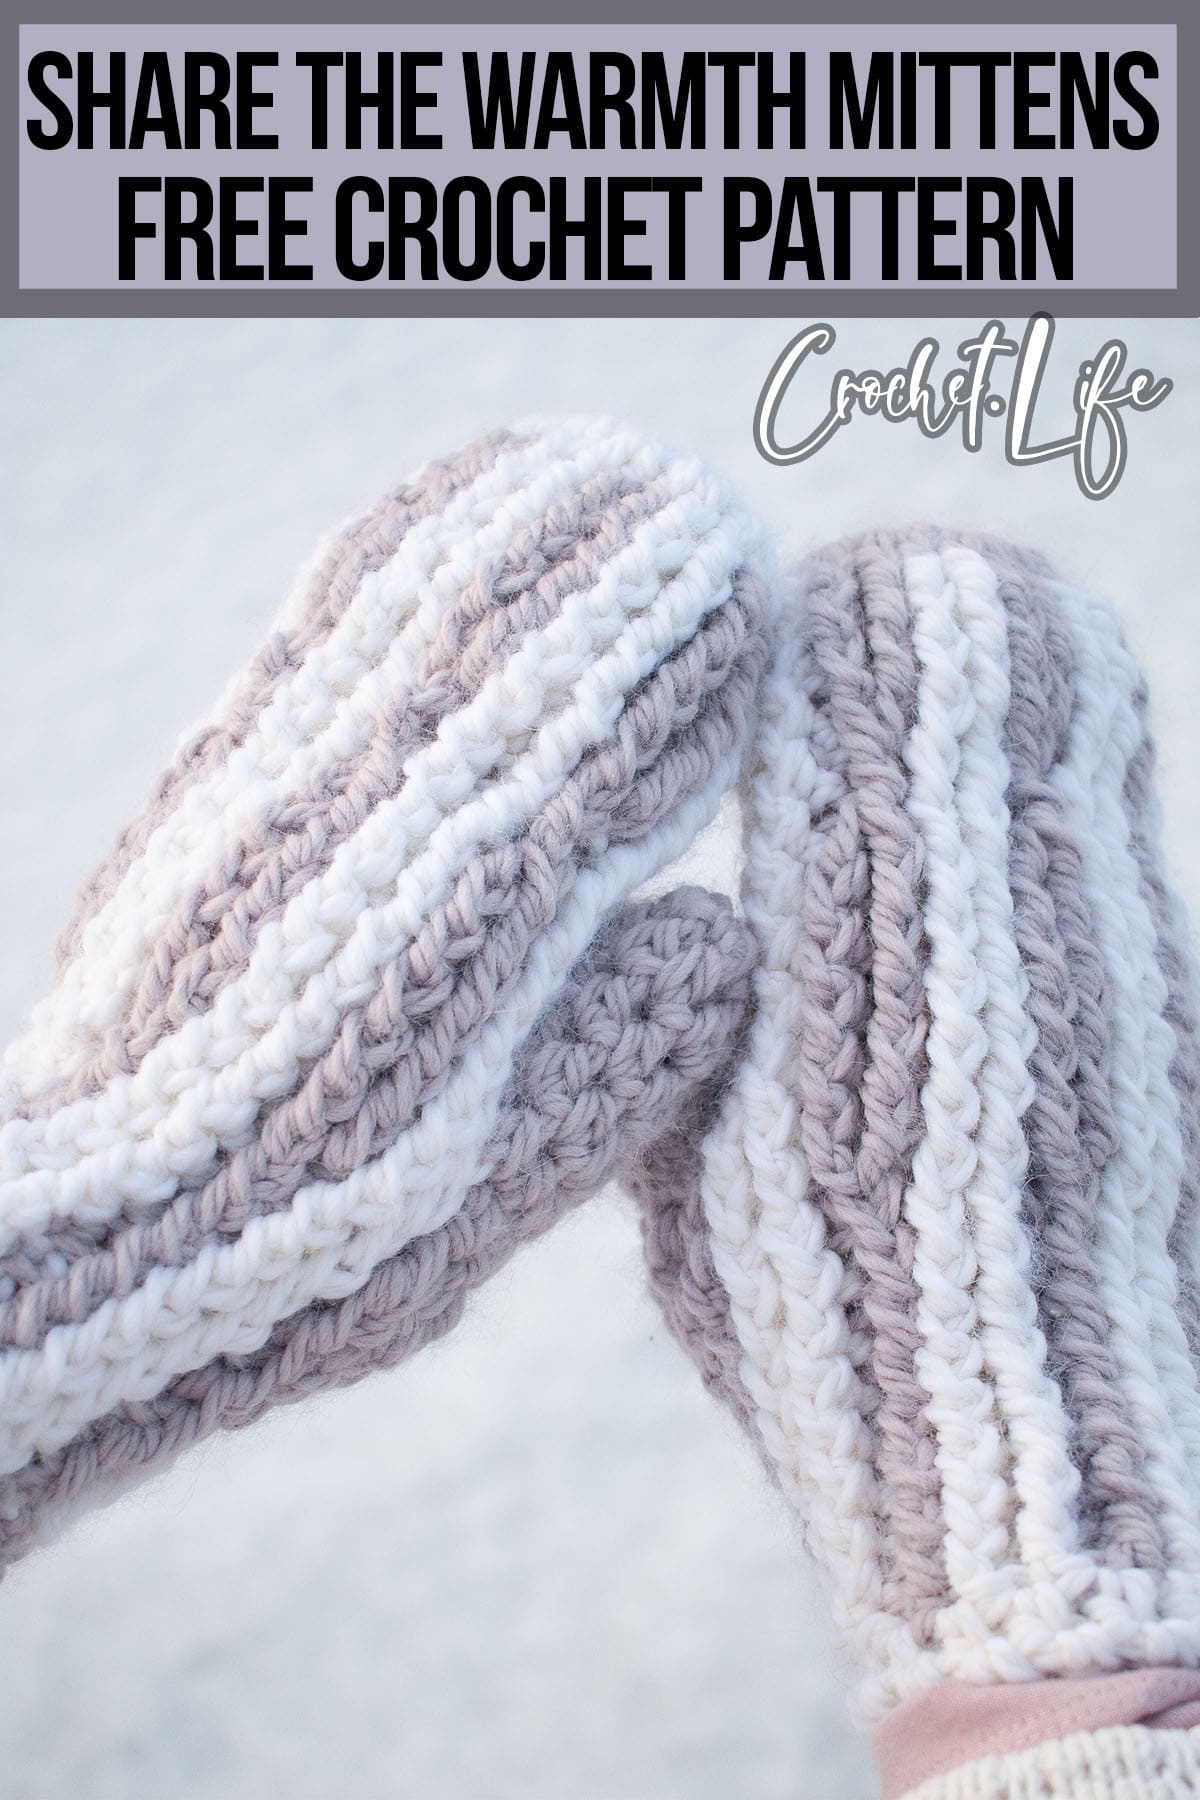 mitten free crochet pattern with text which reads share the warmth mittens free crochet pattern